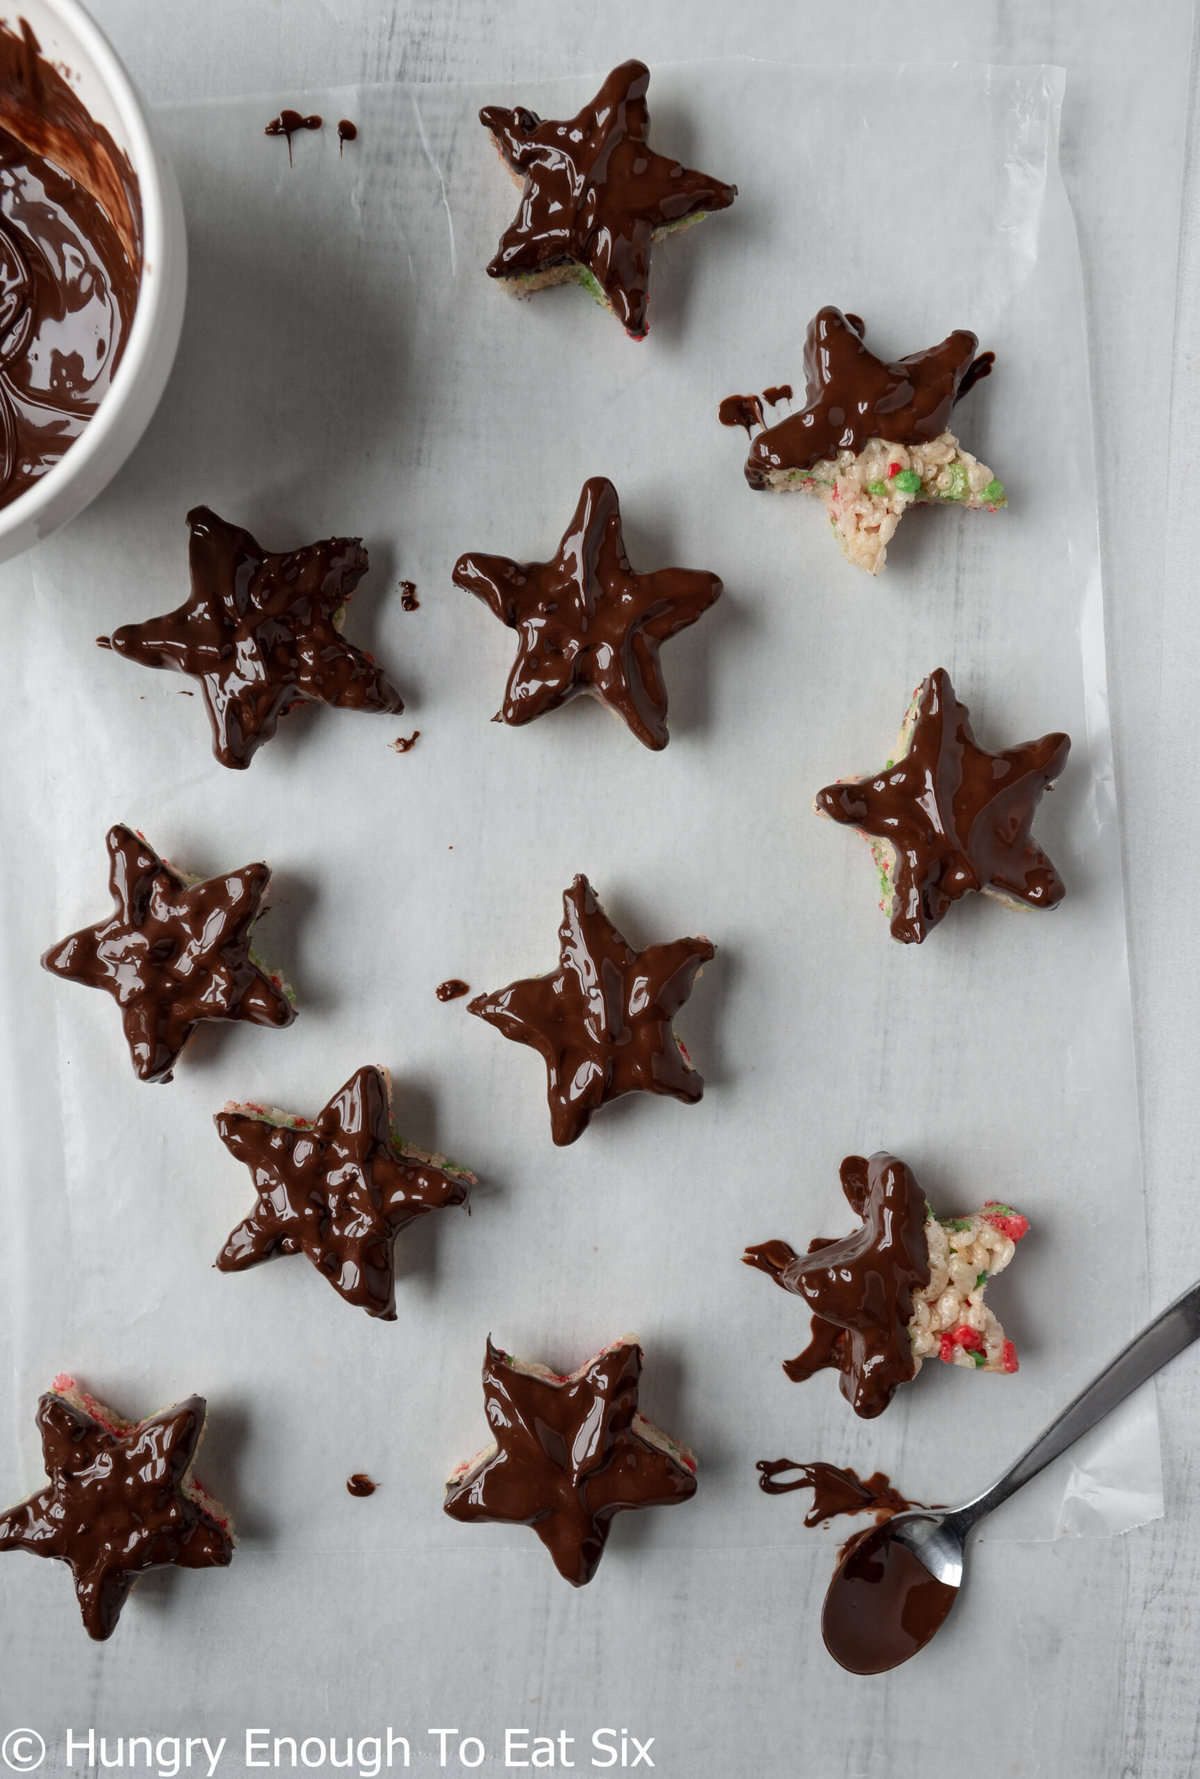 Star treats coated in wet chocolate.